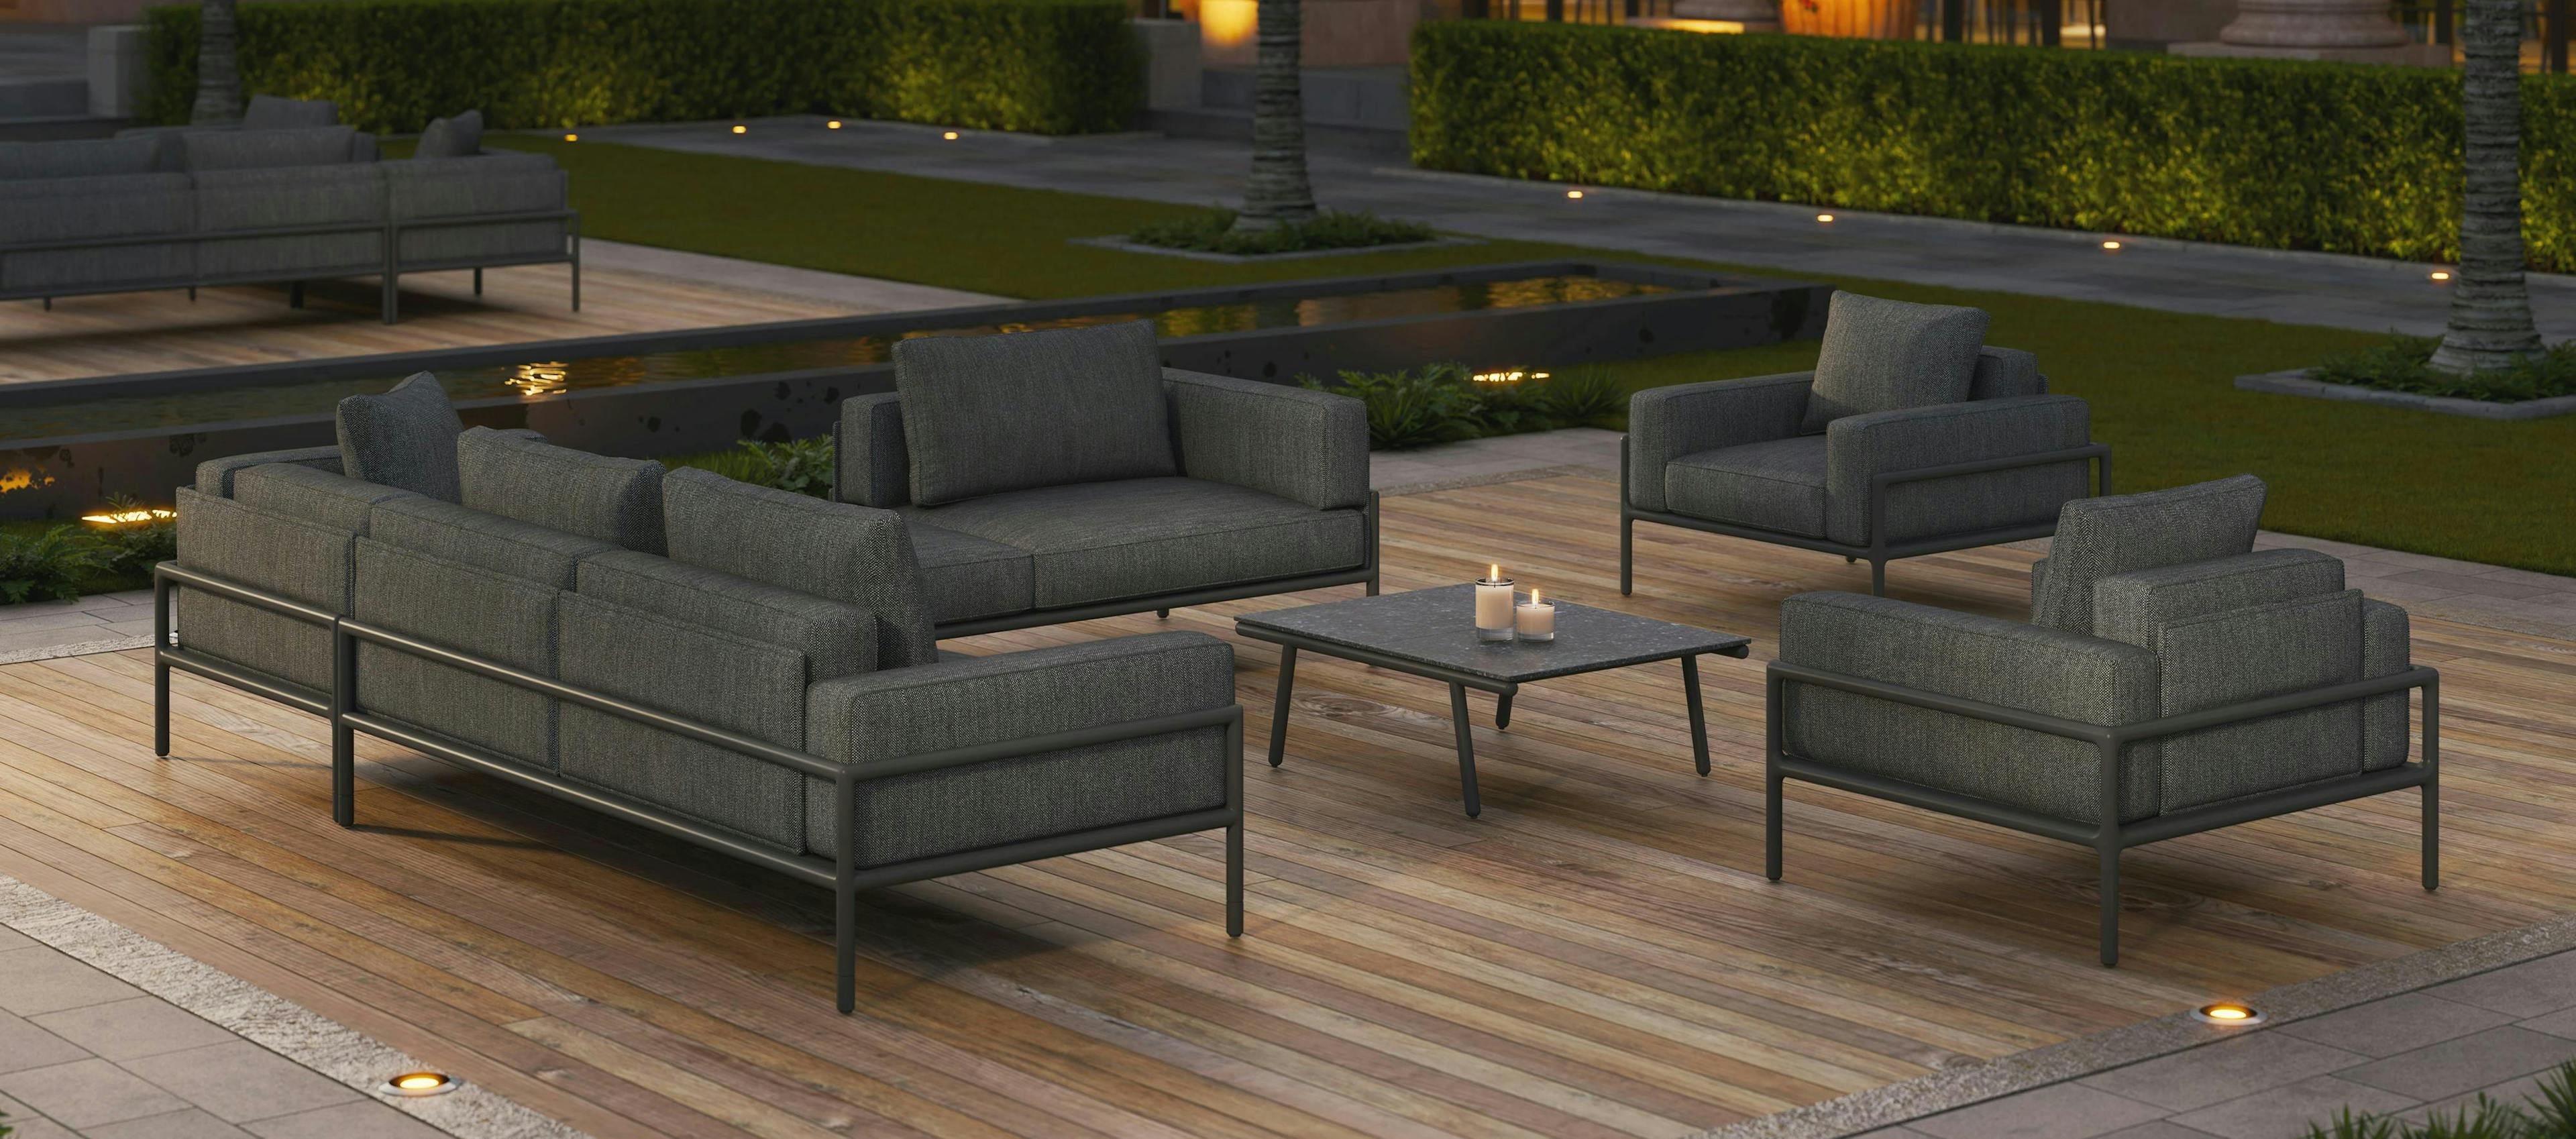 Moto collection by Ann Marie Vering, image shows seating set with modular sofas, lounge chairs, and a coffee table in the center on a wooden deck in nighttime setting.